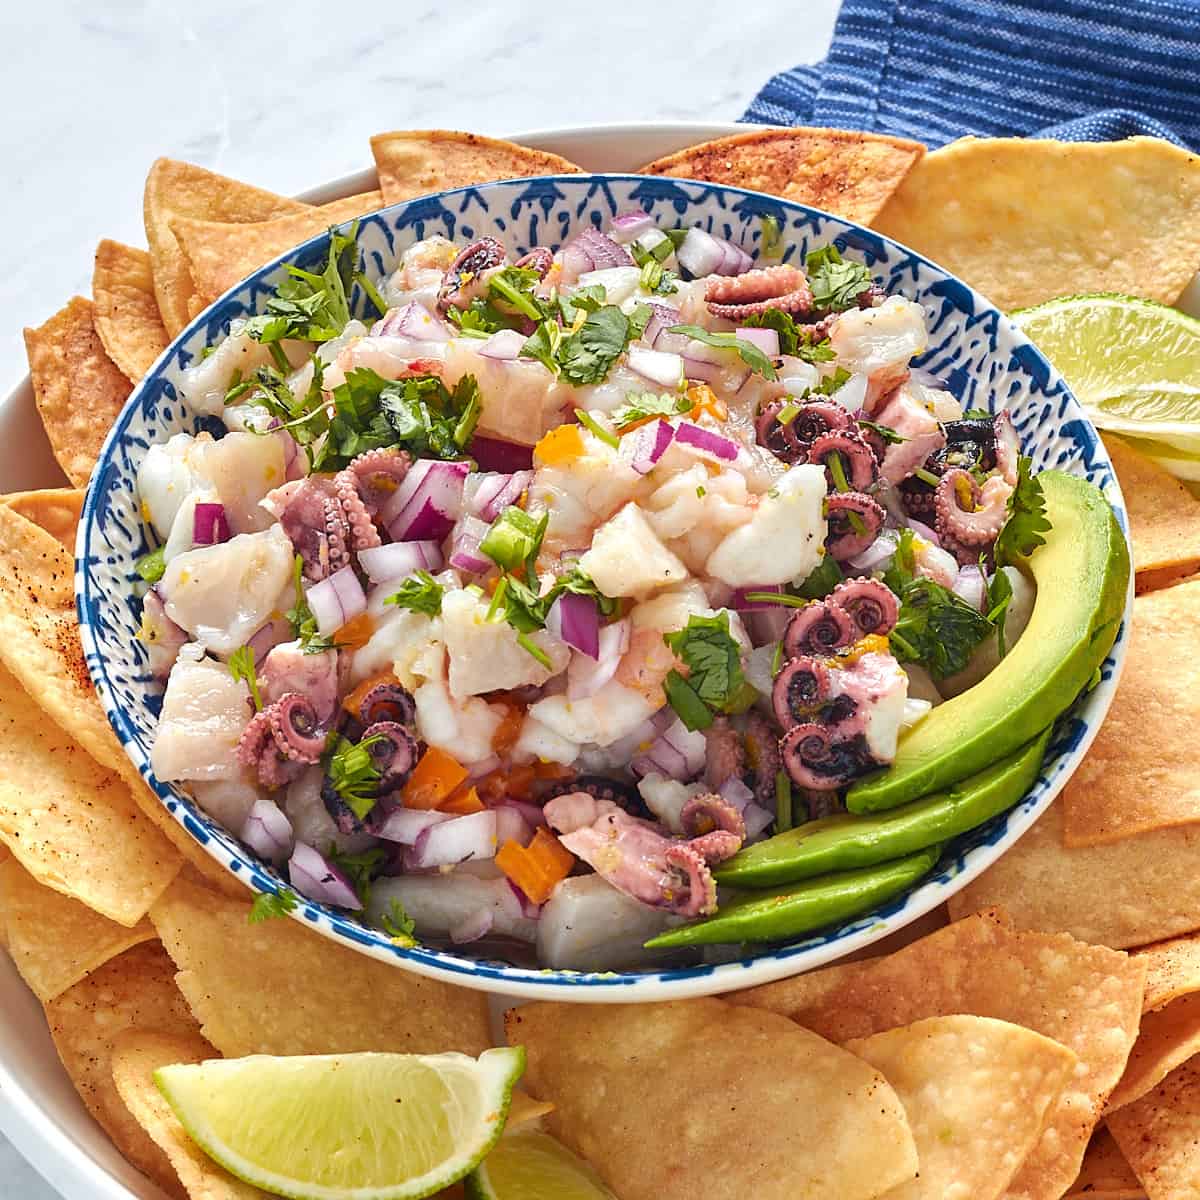 octopus ceviche in a bowl surrounded by chips and a side of avocado